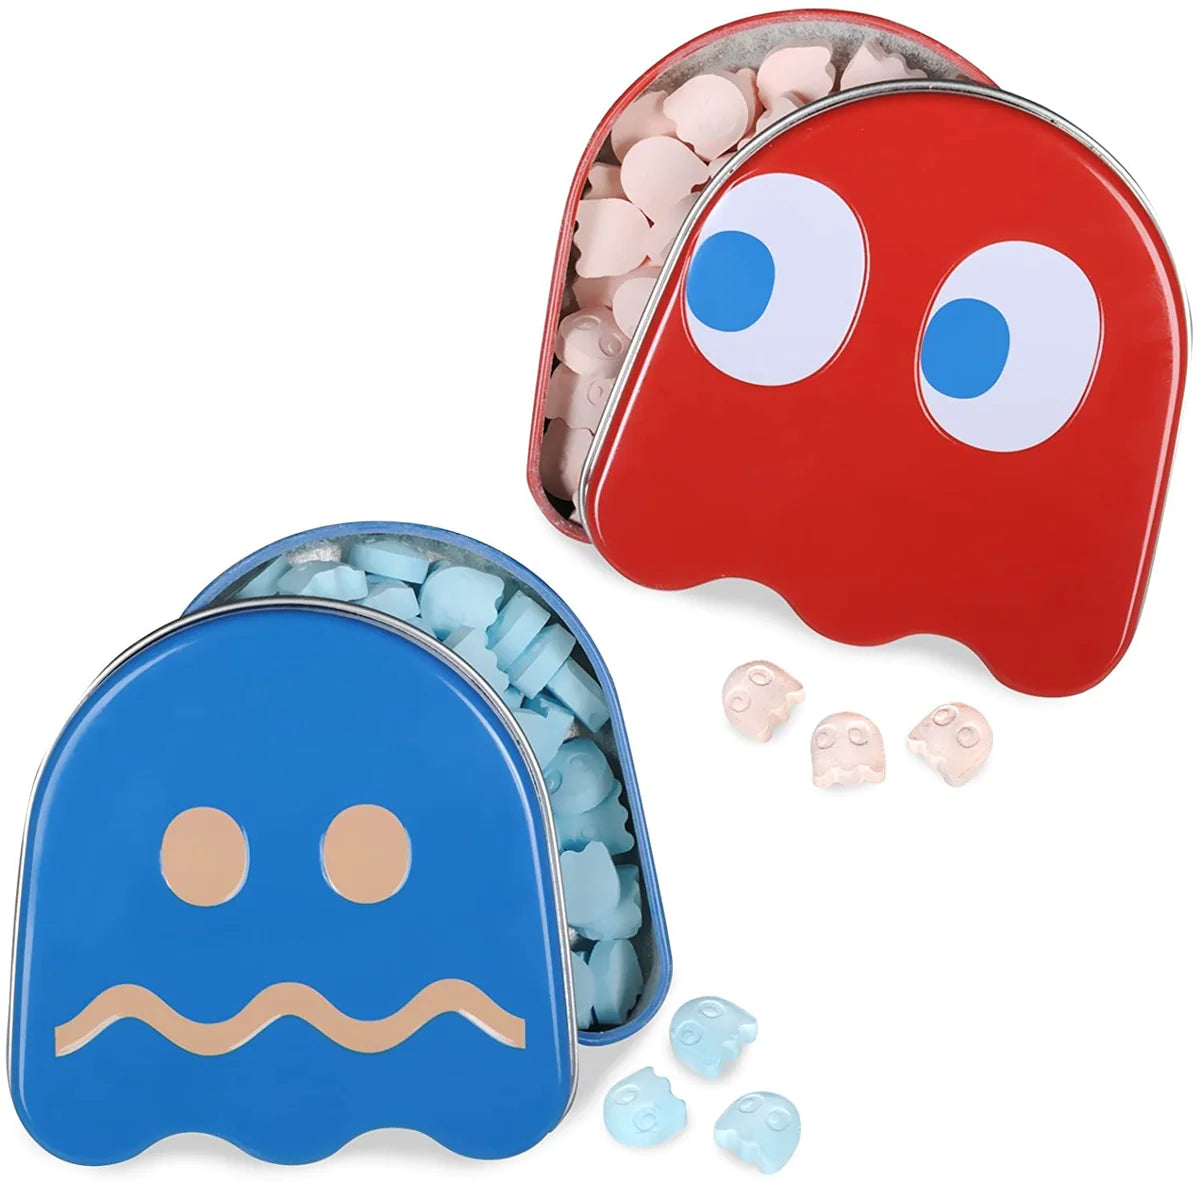 PAC-MAN Ghost Sour Candy (Tin)